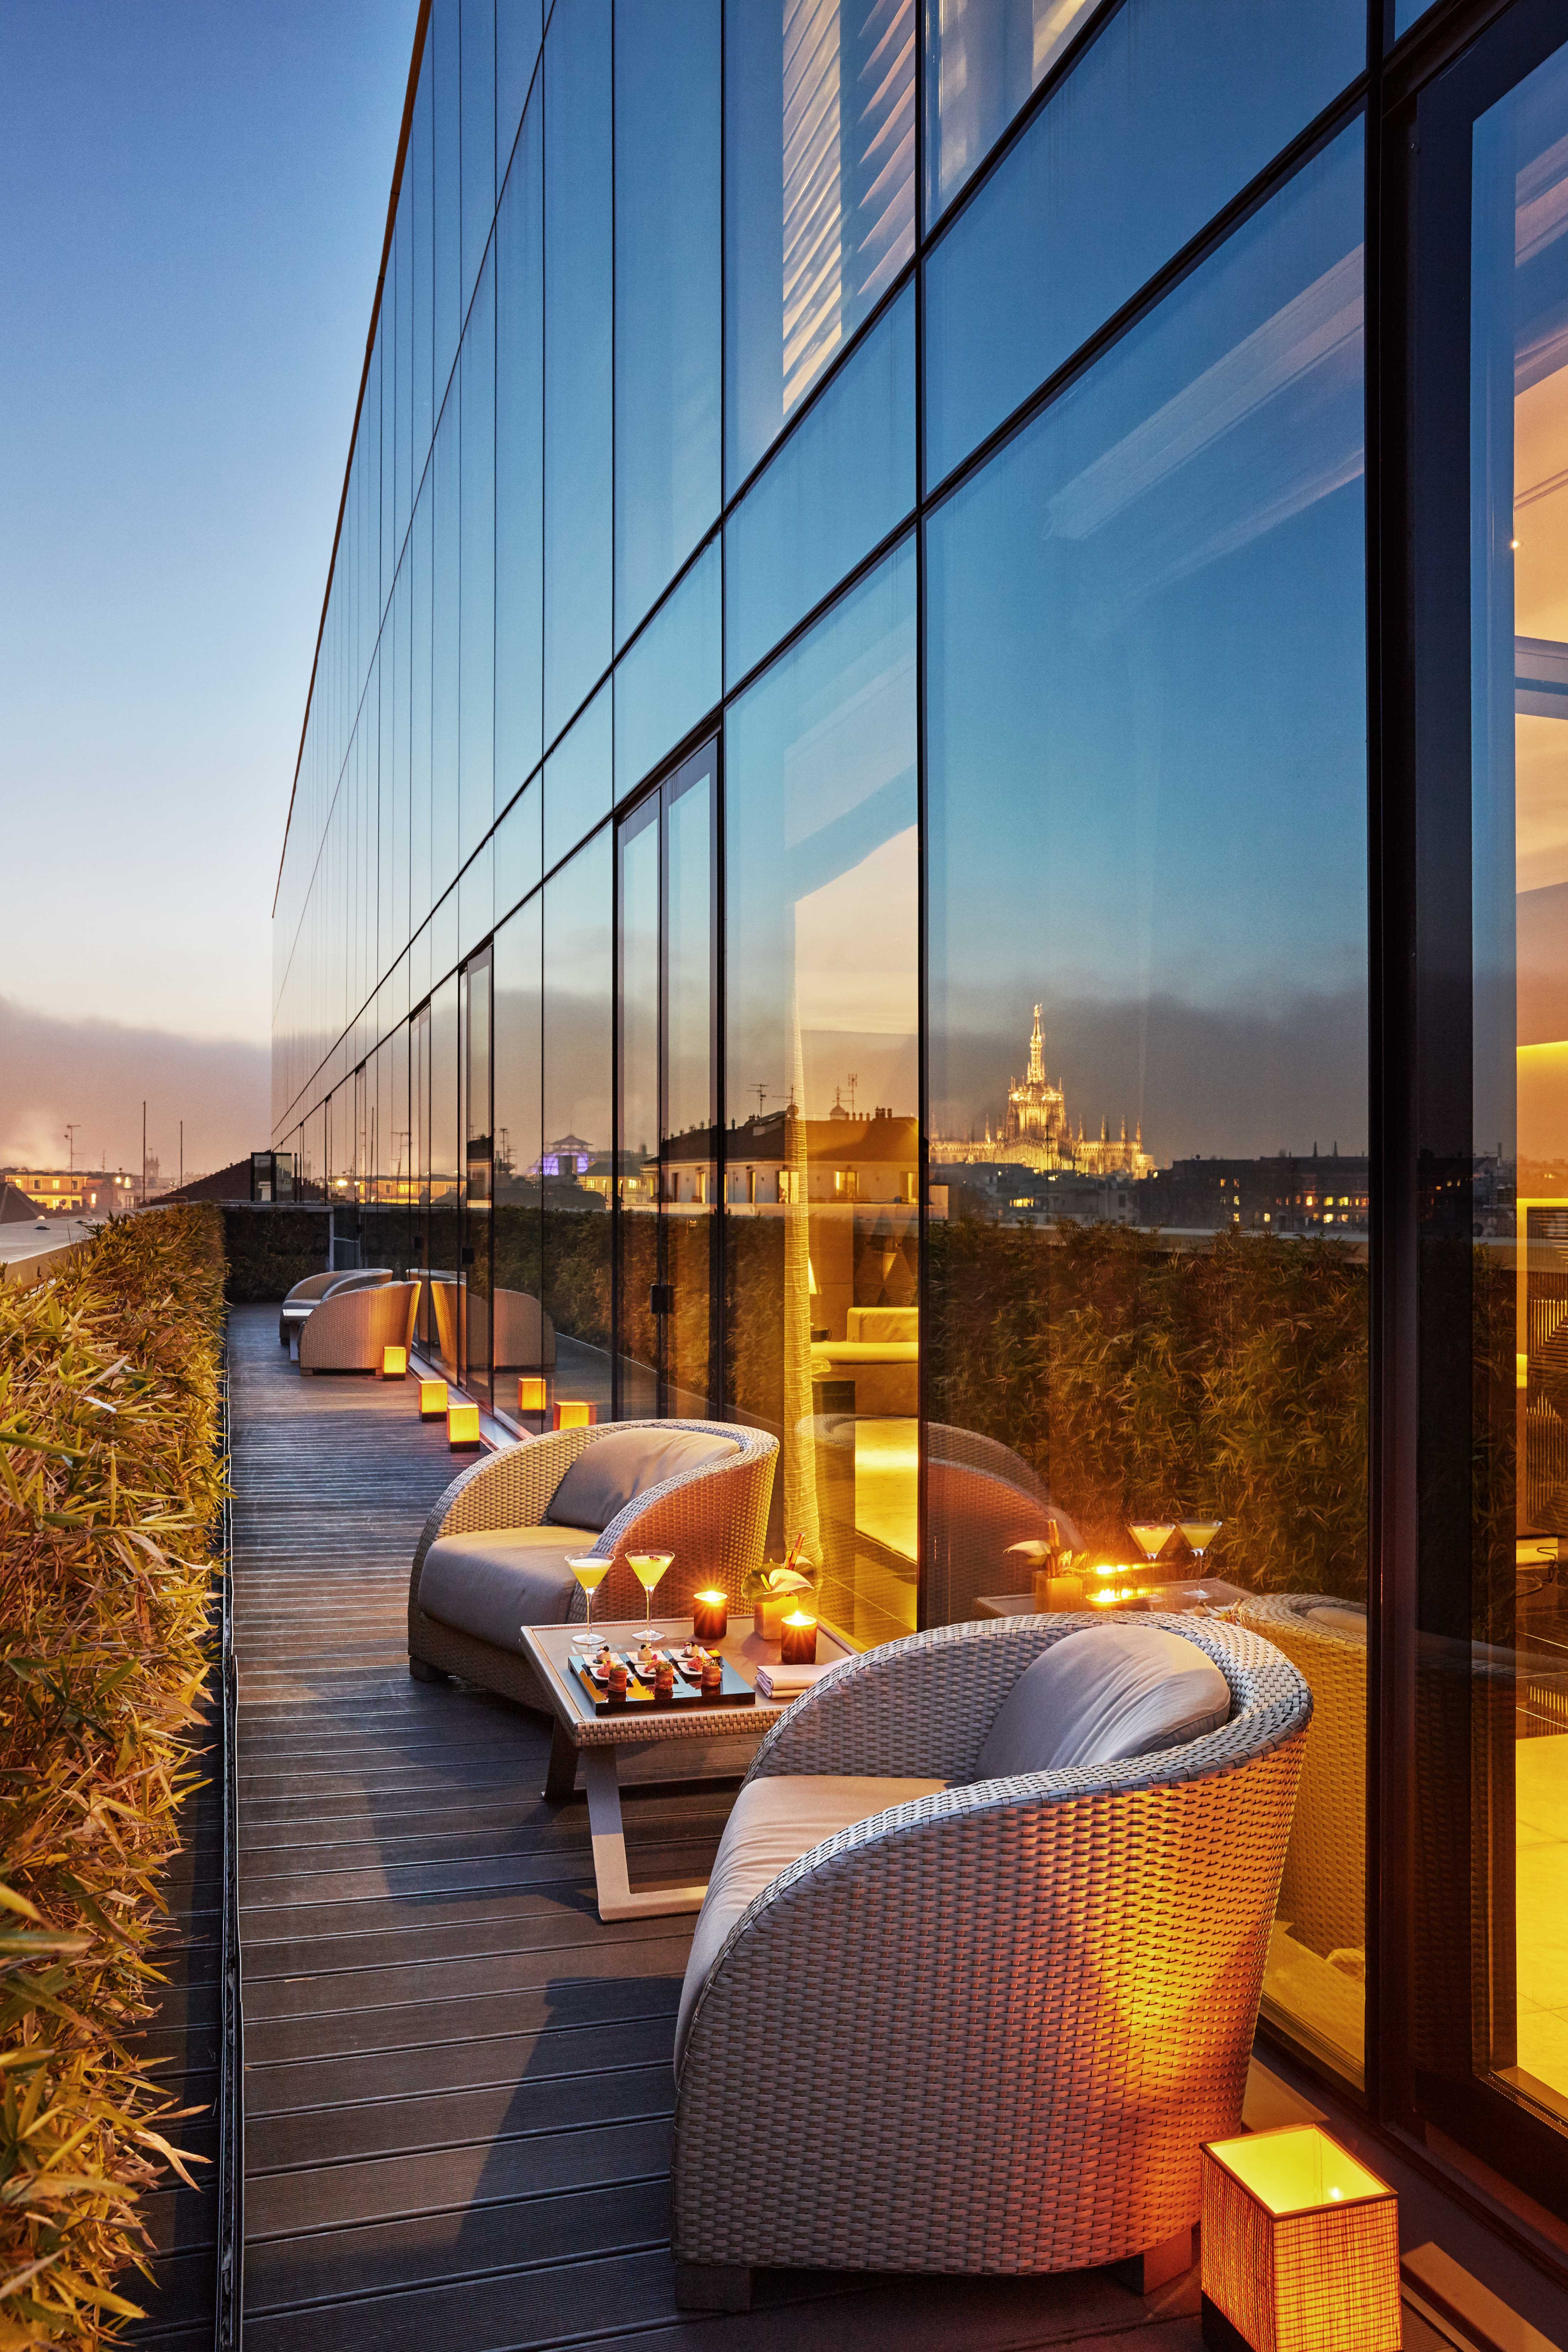 Armani Hotel Milano | Flawless Milano - The Lifestyle Guide